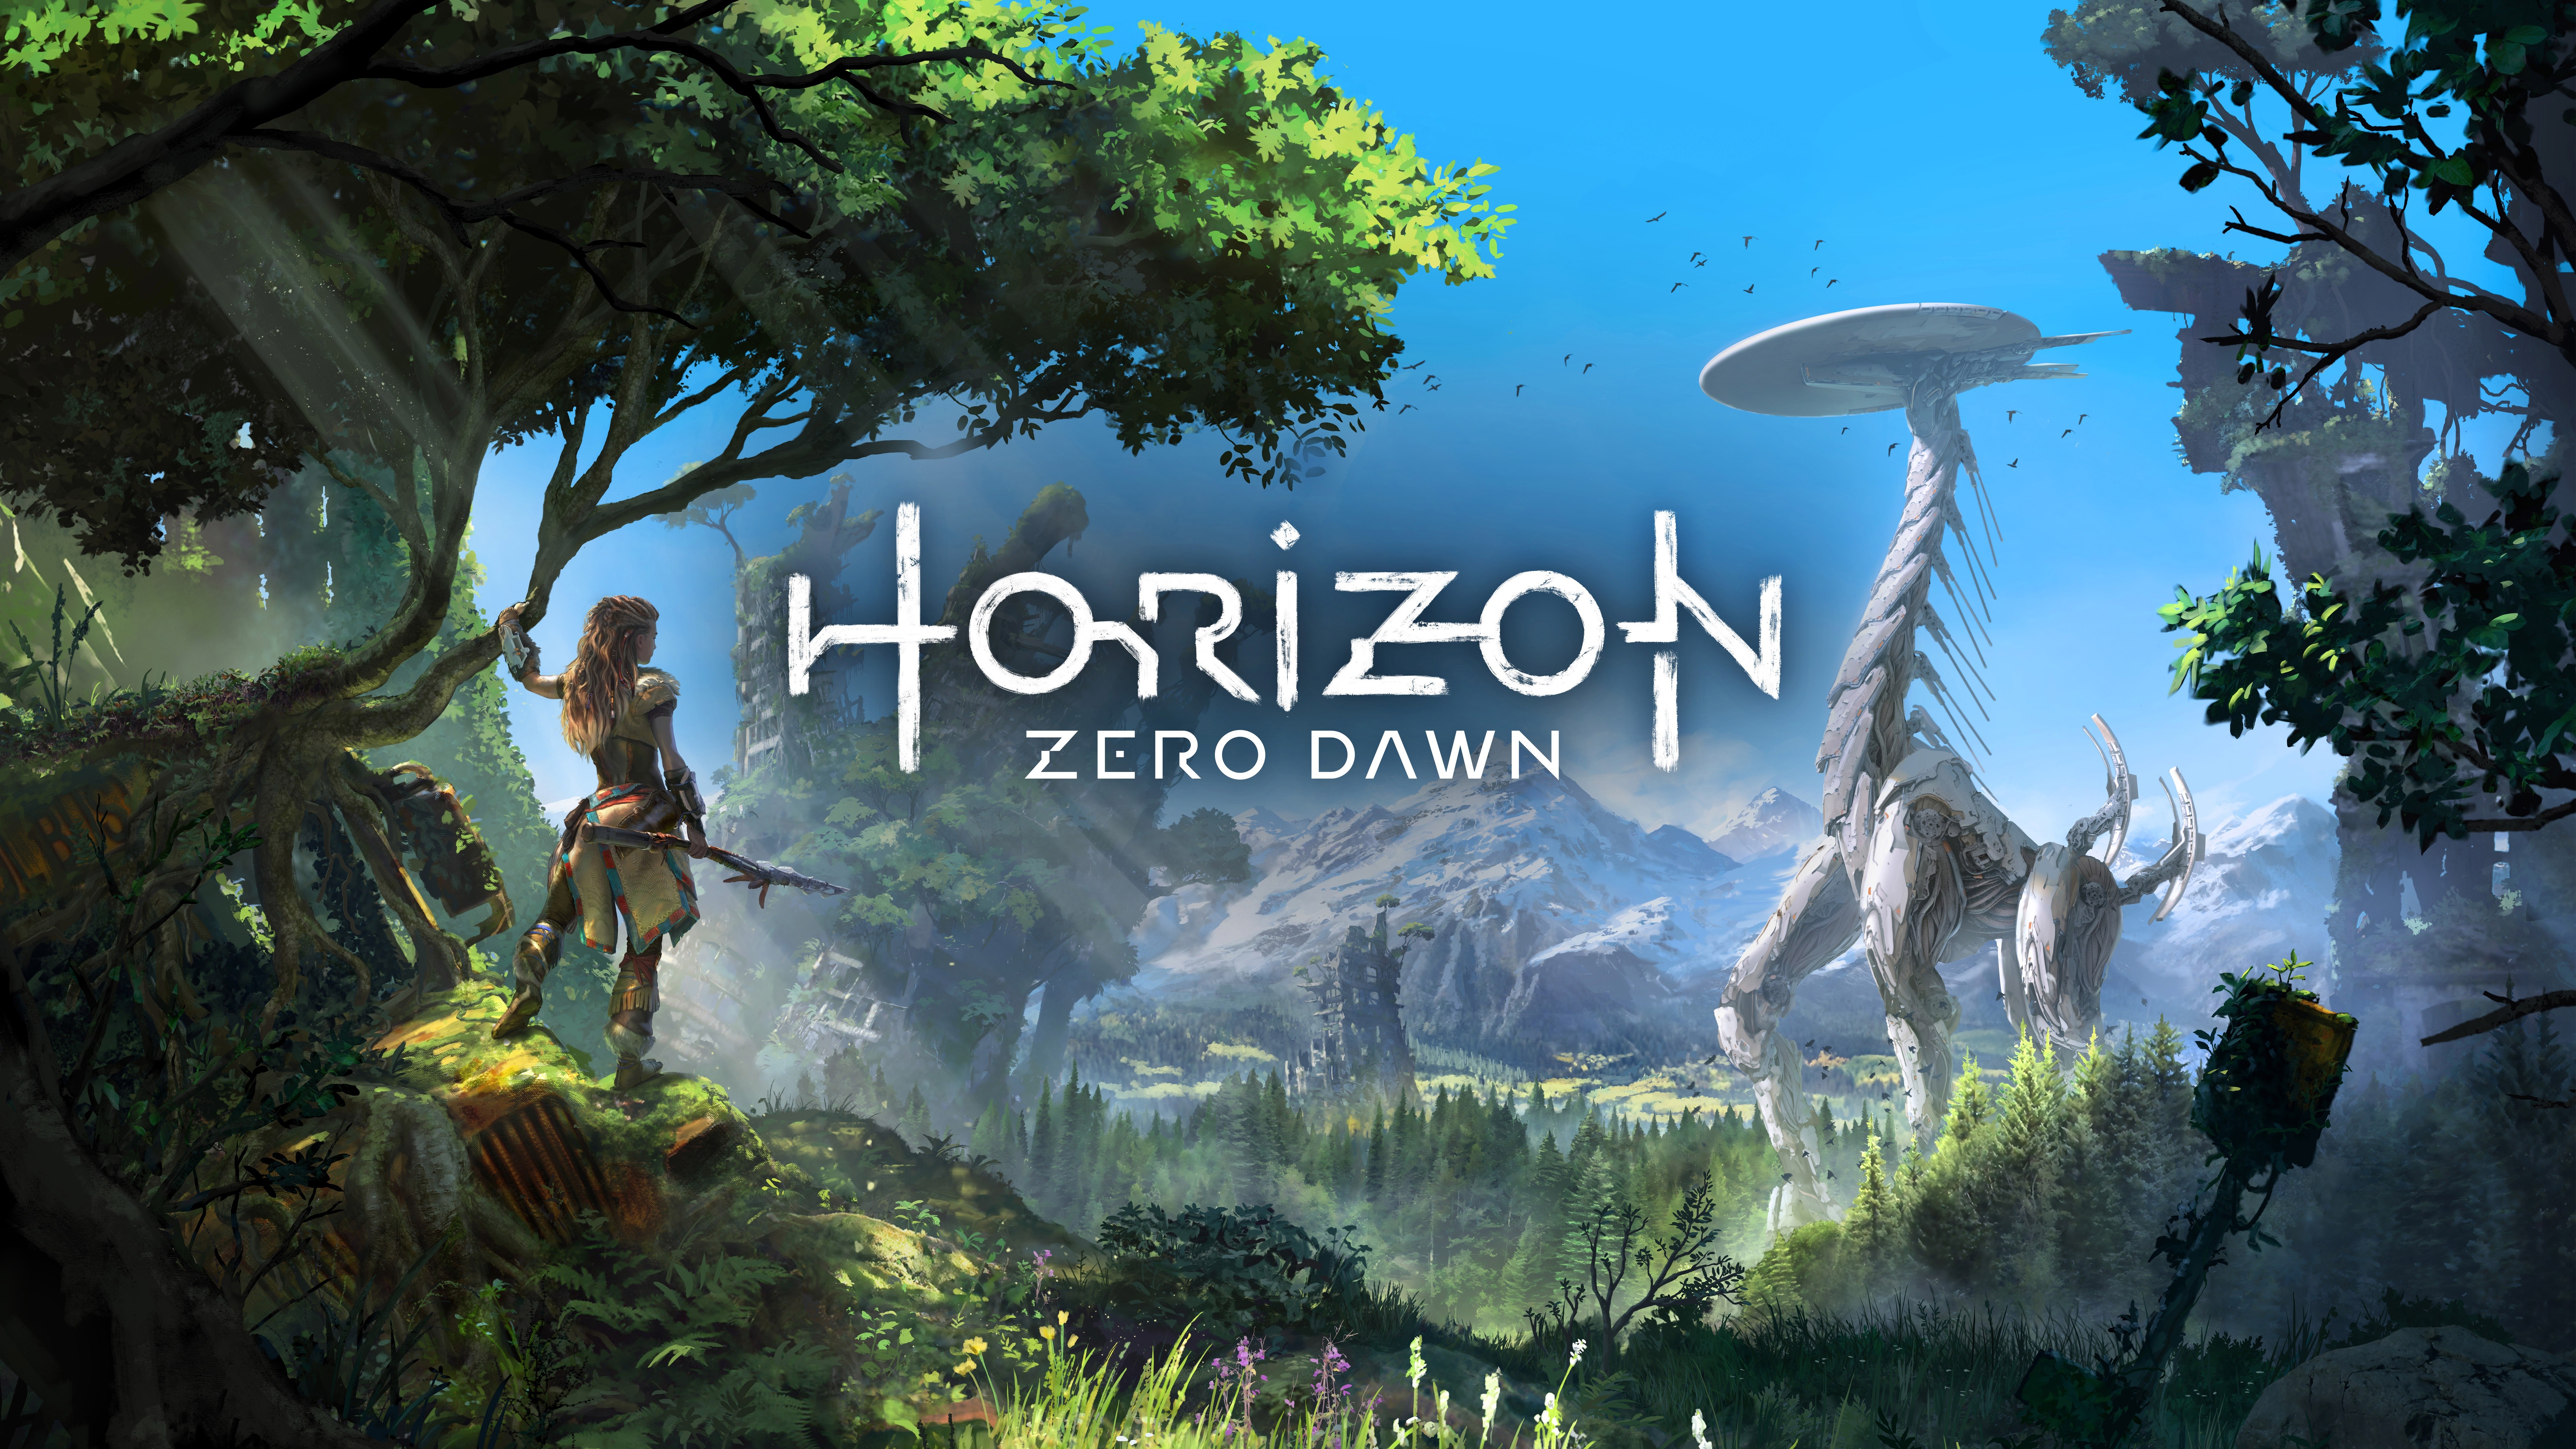 General 7680x4320 Horizon: Zero Dawn video games PlayStation 4 science fiction Aloy video game characters video game girls guerrilla games